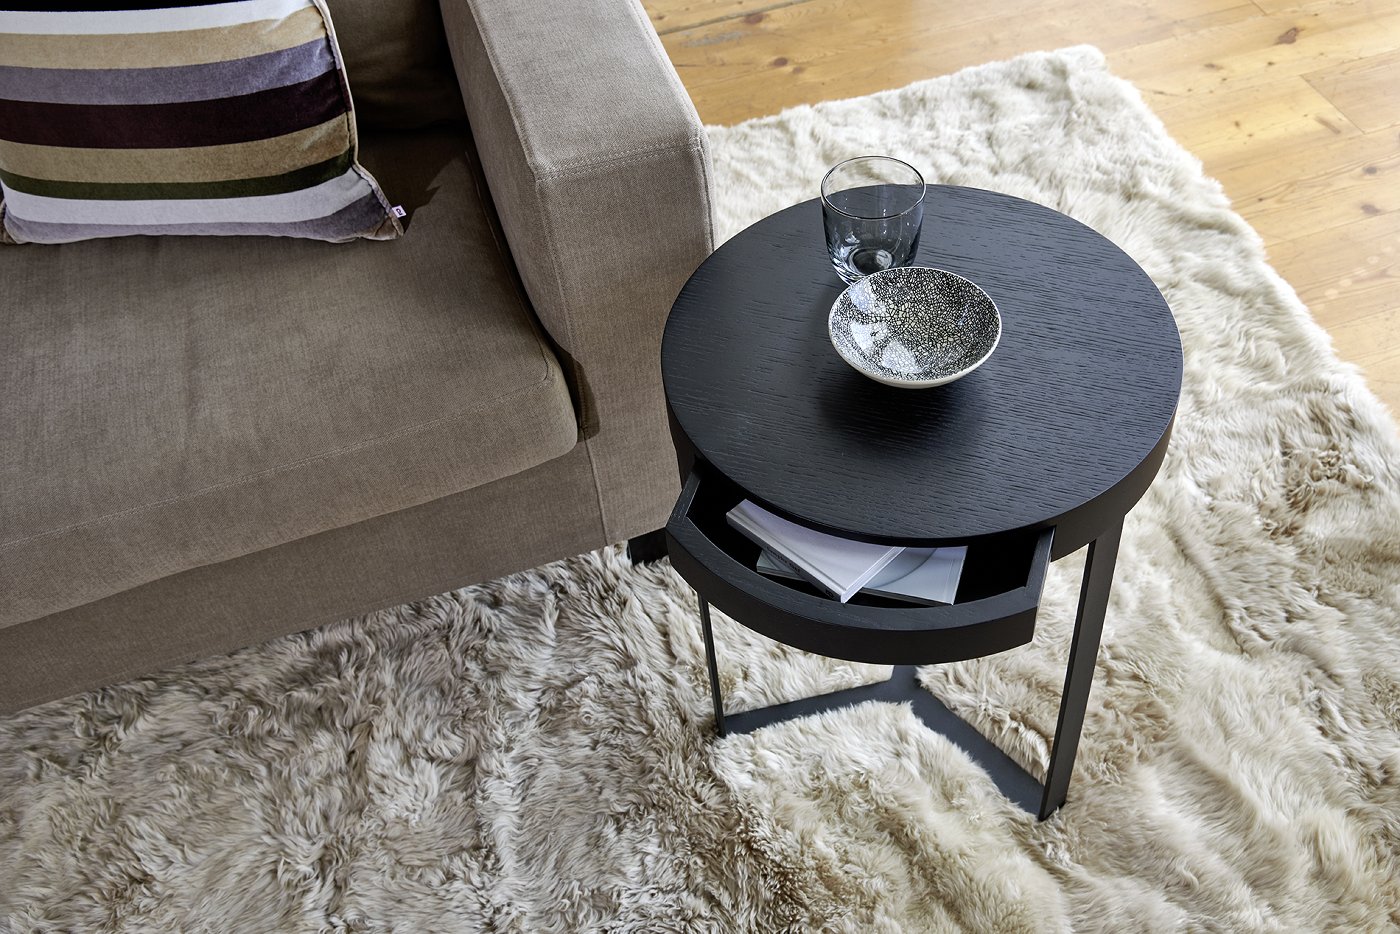 Harry sidetable with drawer,